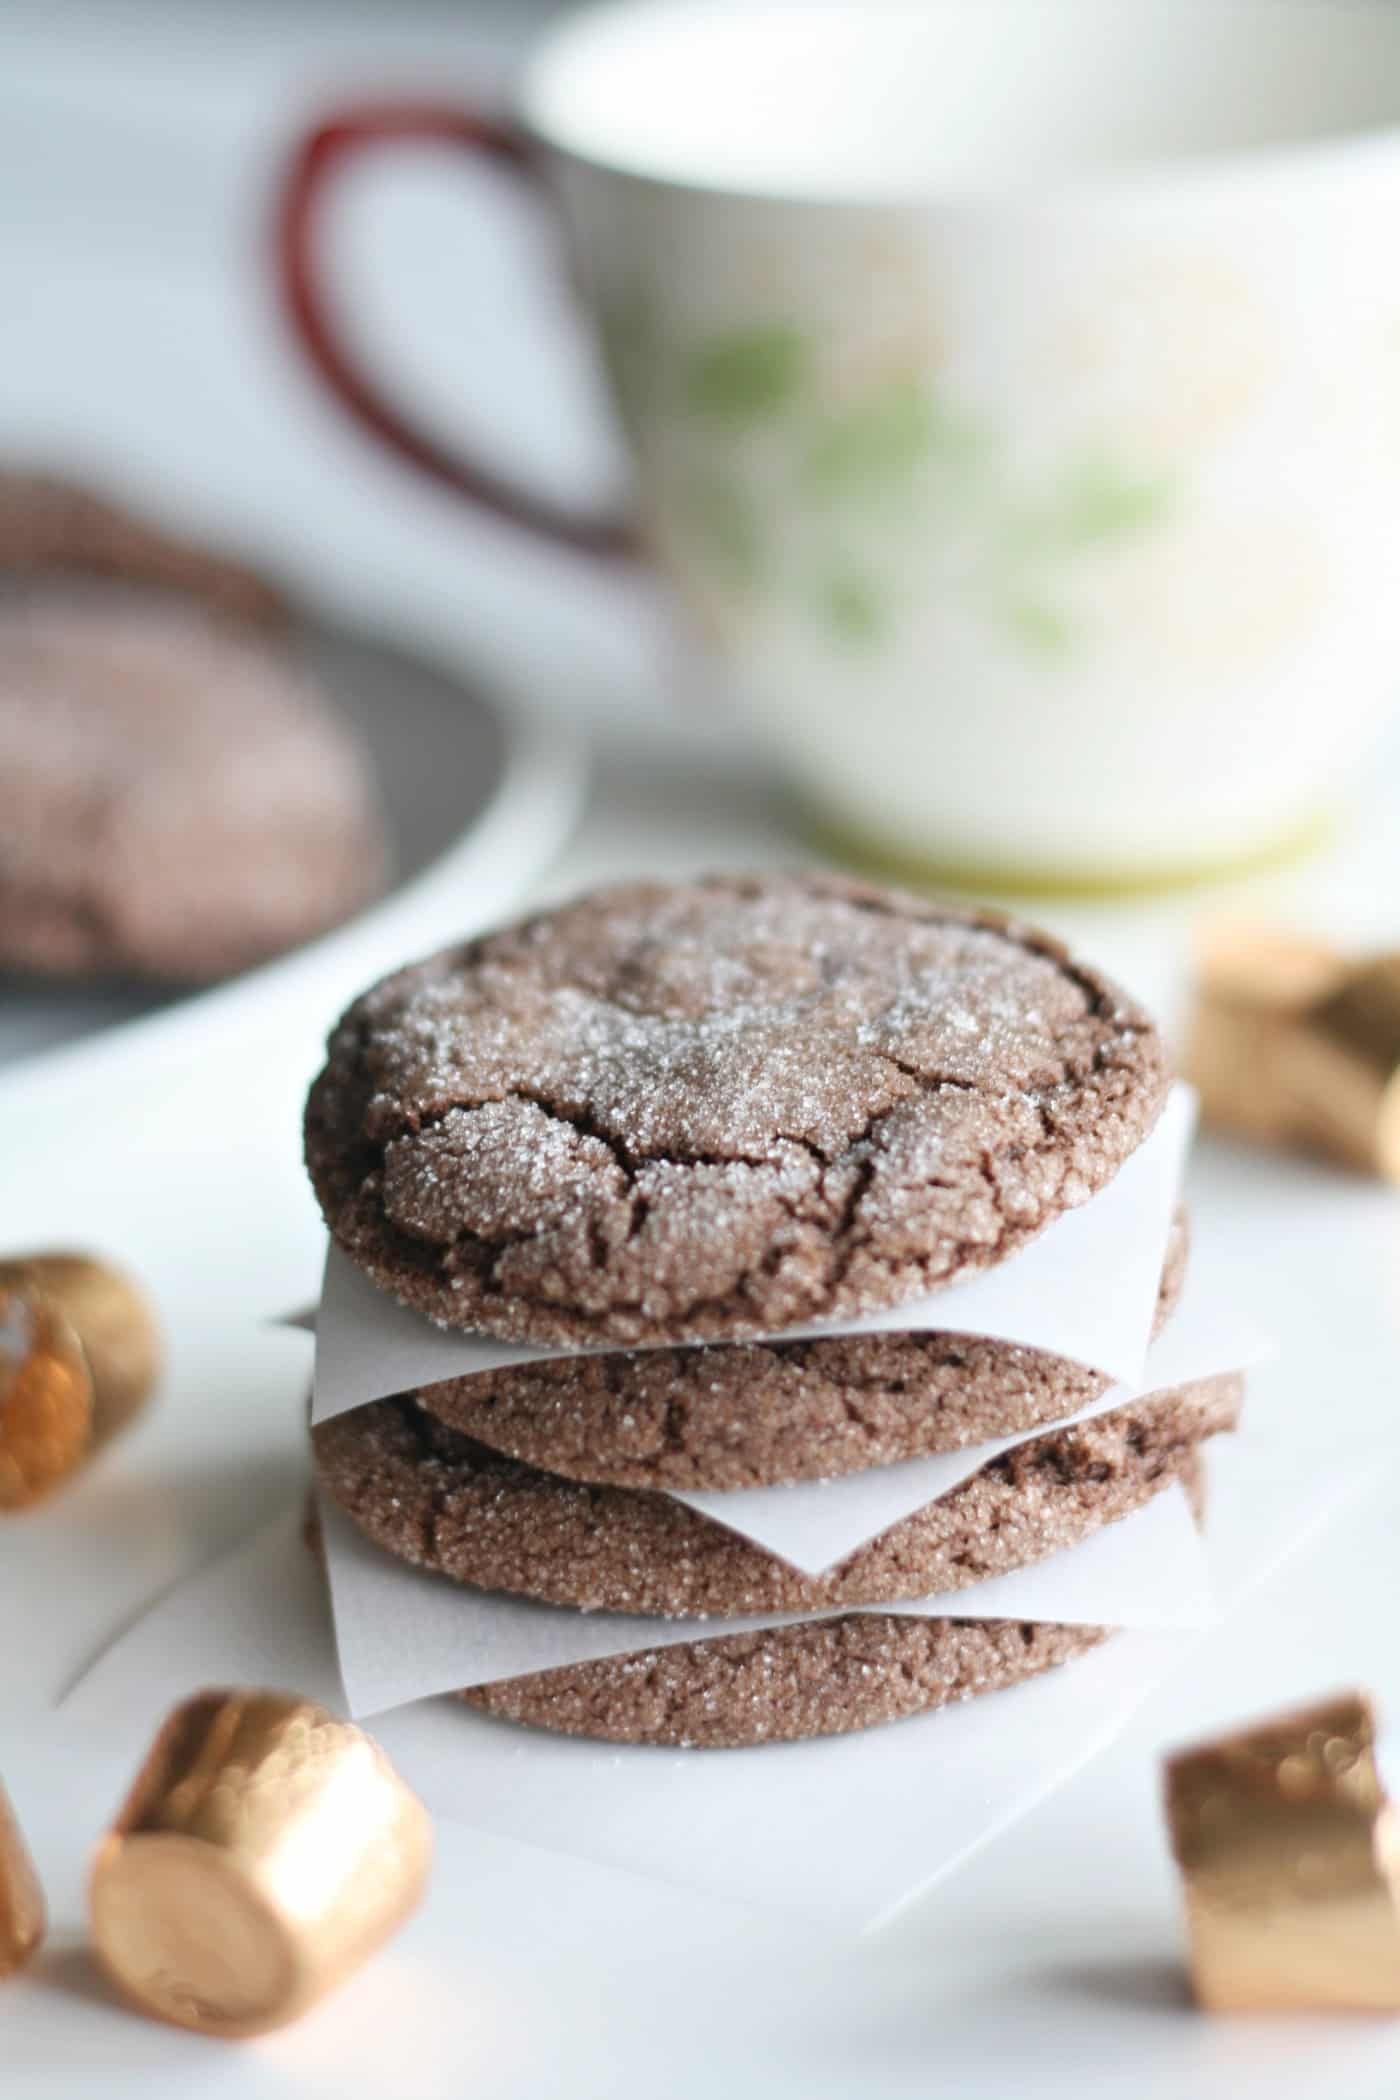 Delicious chocolate cookies made with Rolos